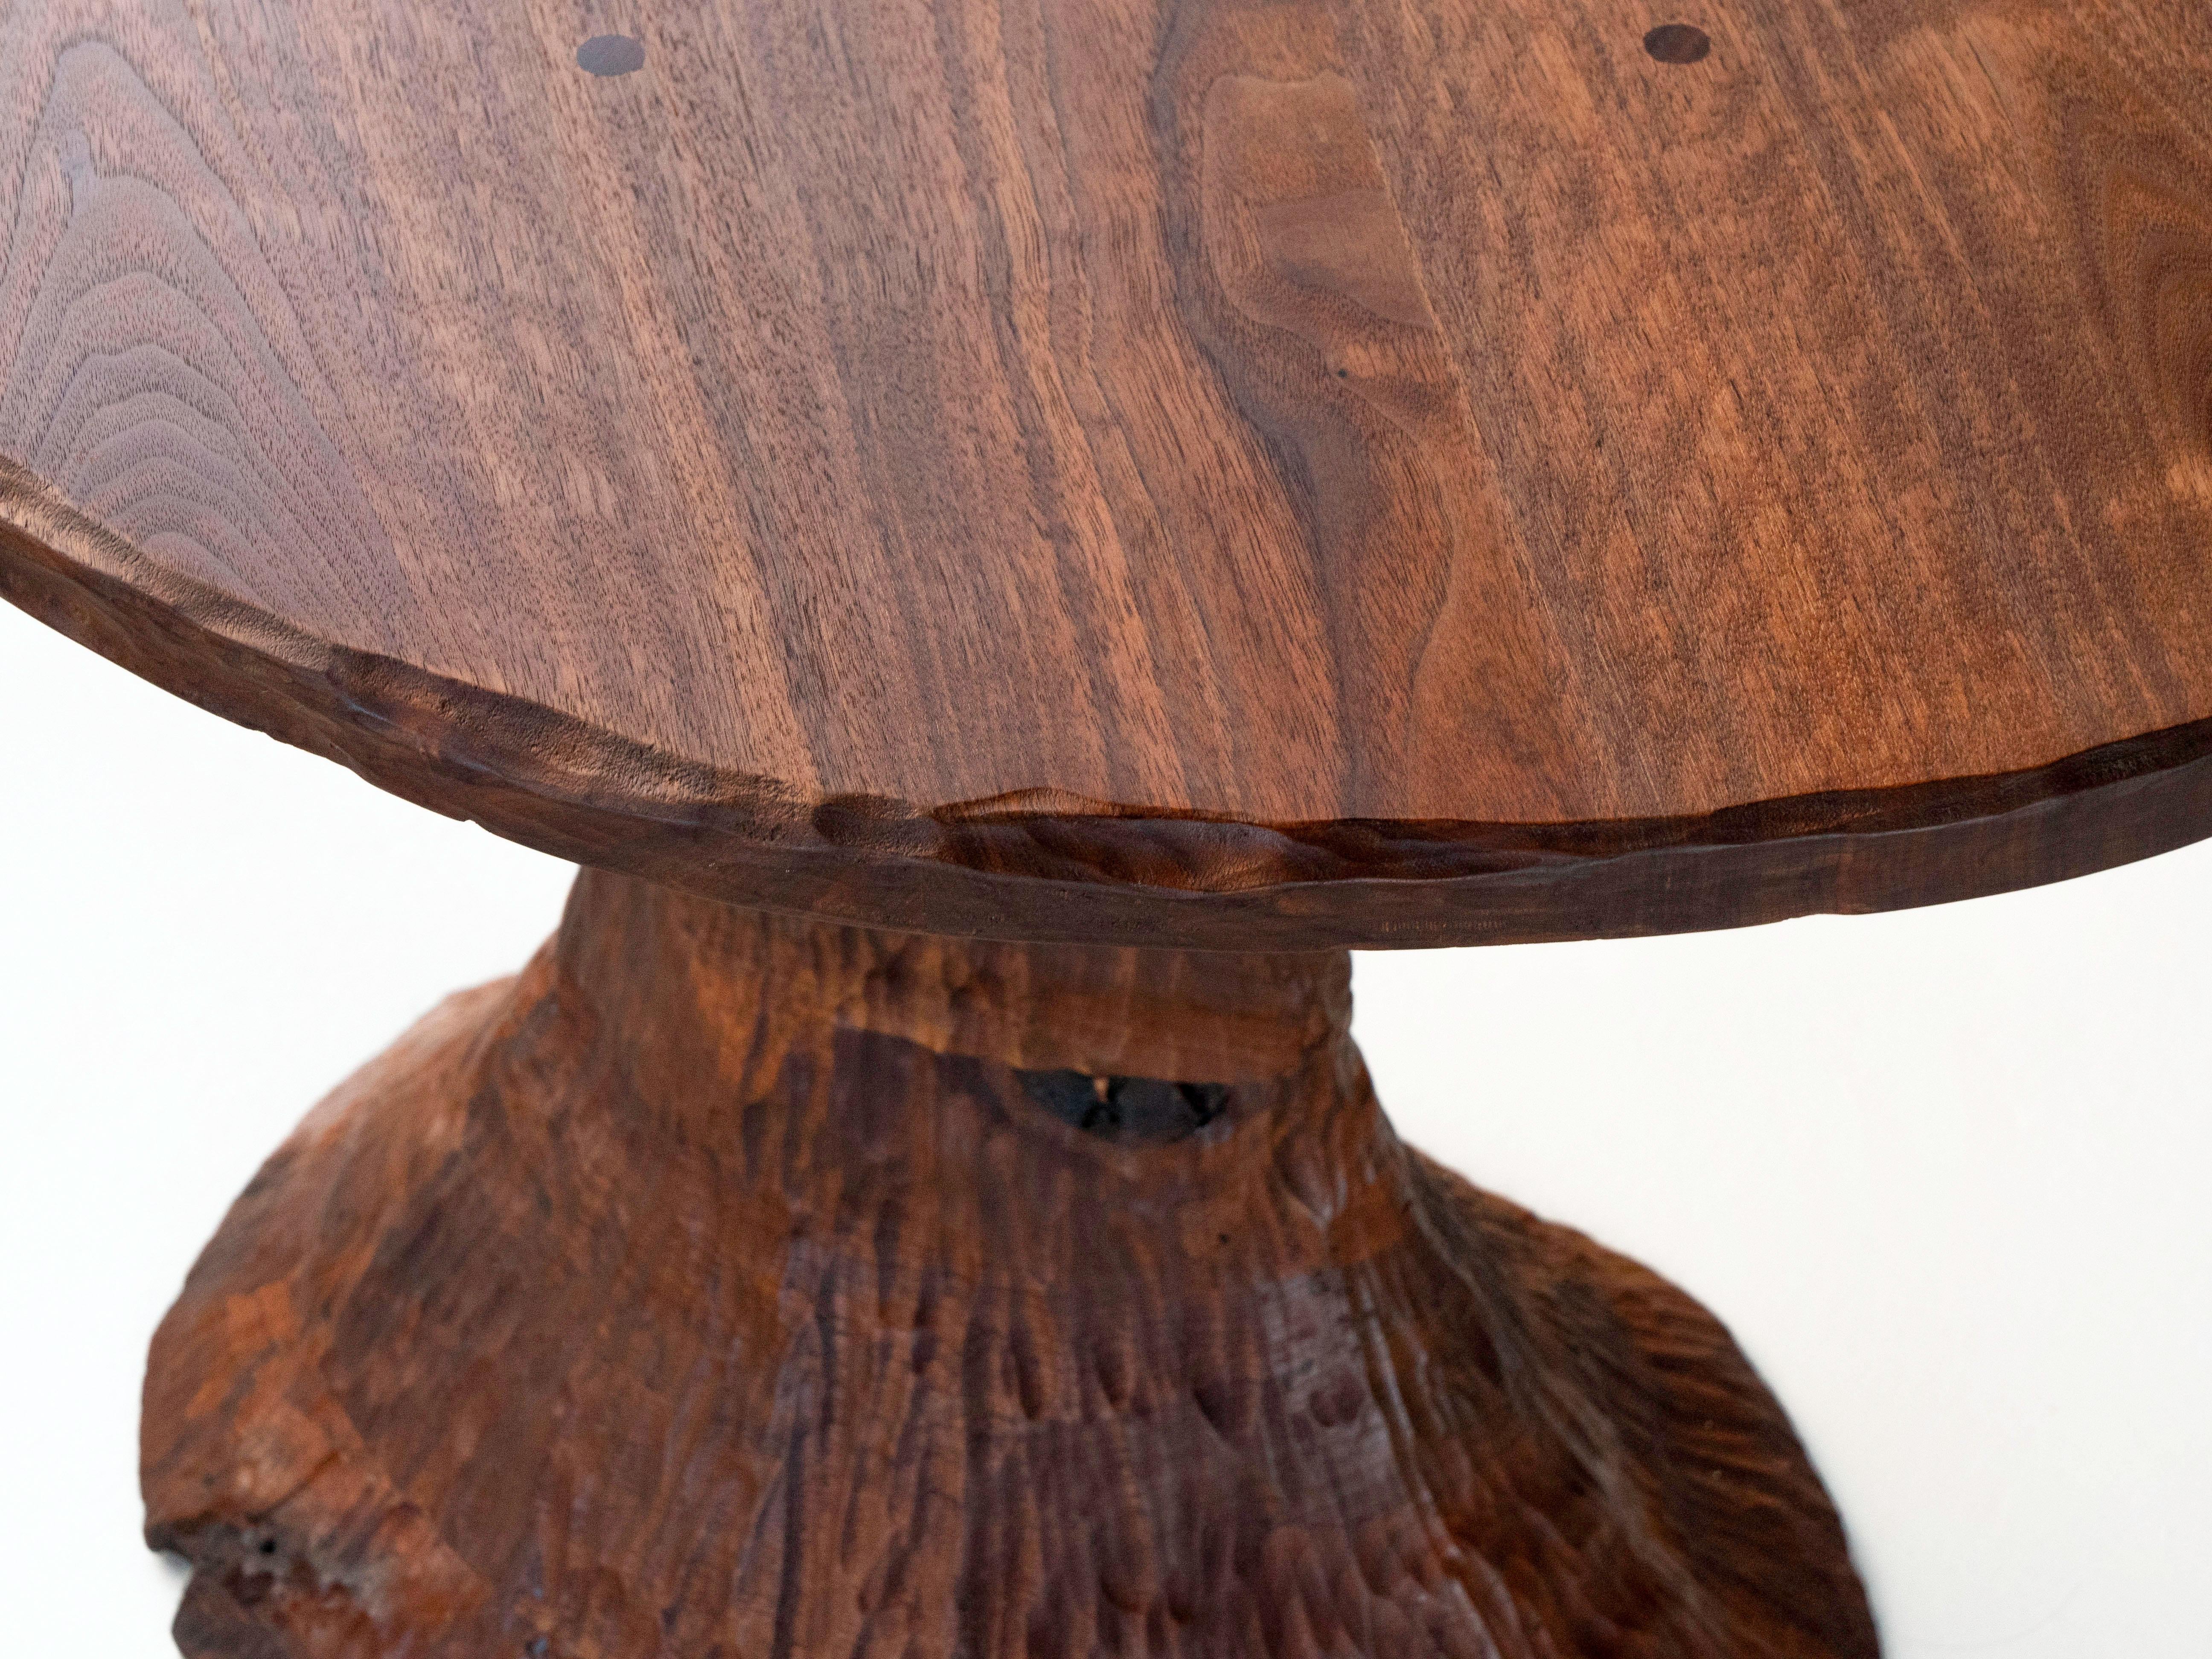 Phillip Lloyd Powell Pair of Solid Black Walnut Side Tables, Hand Carved 1960's For Sale 6